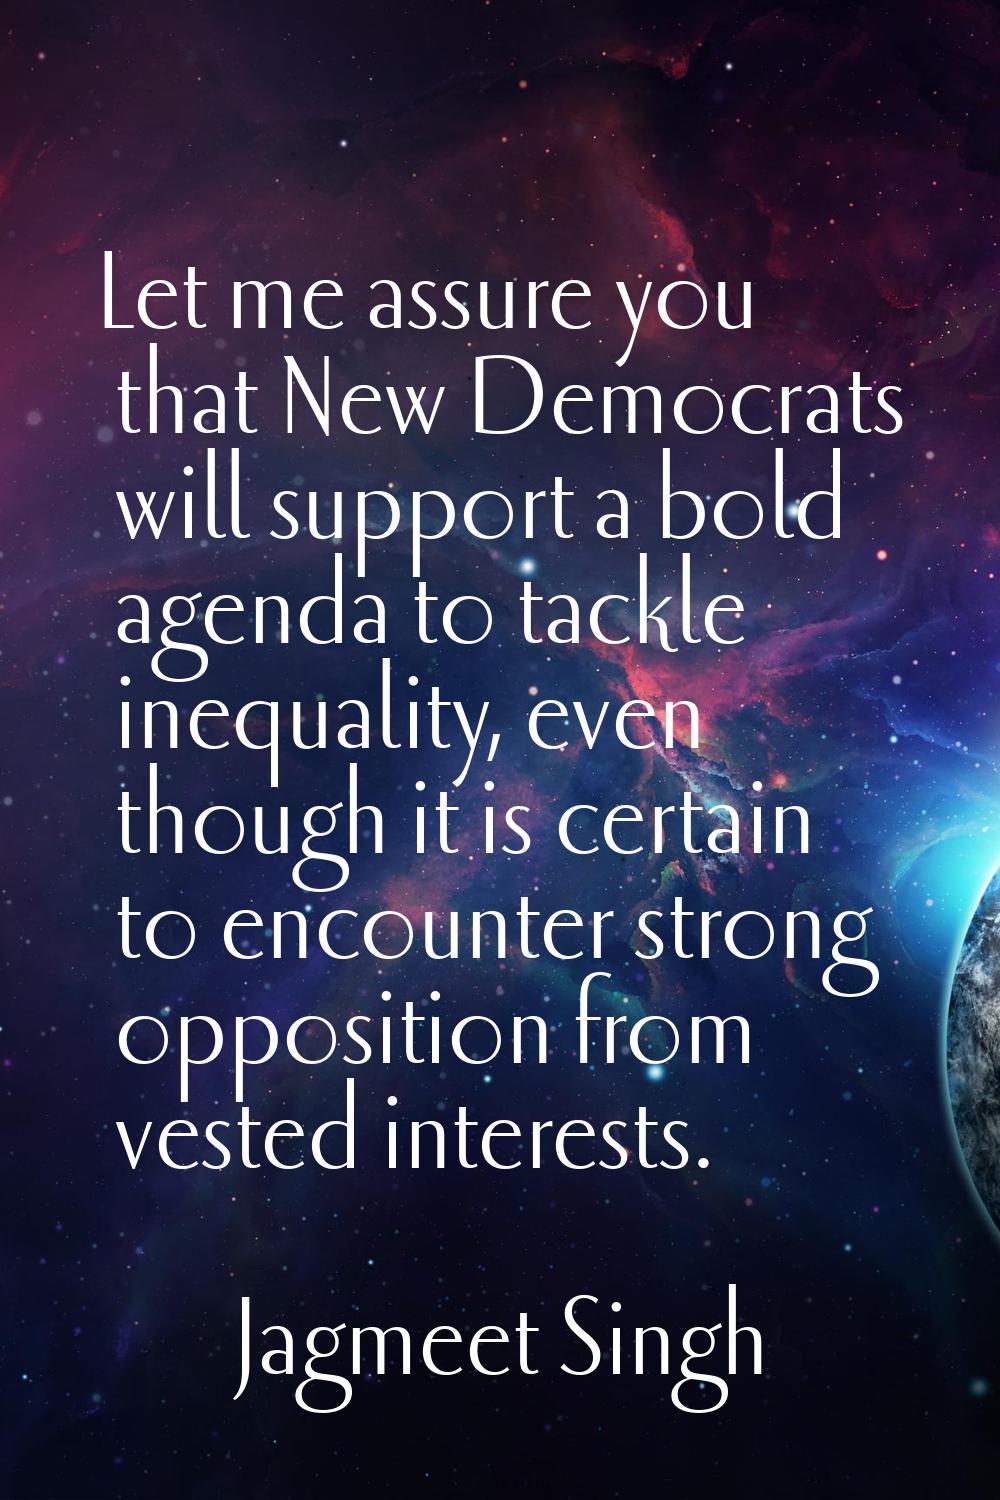 Let me assure you that New Democrats will support a bold agenda to tackle inequality, even though i